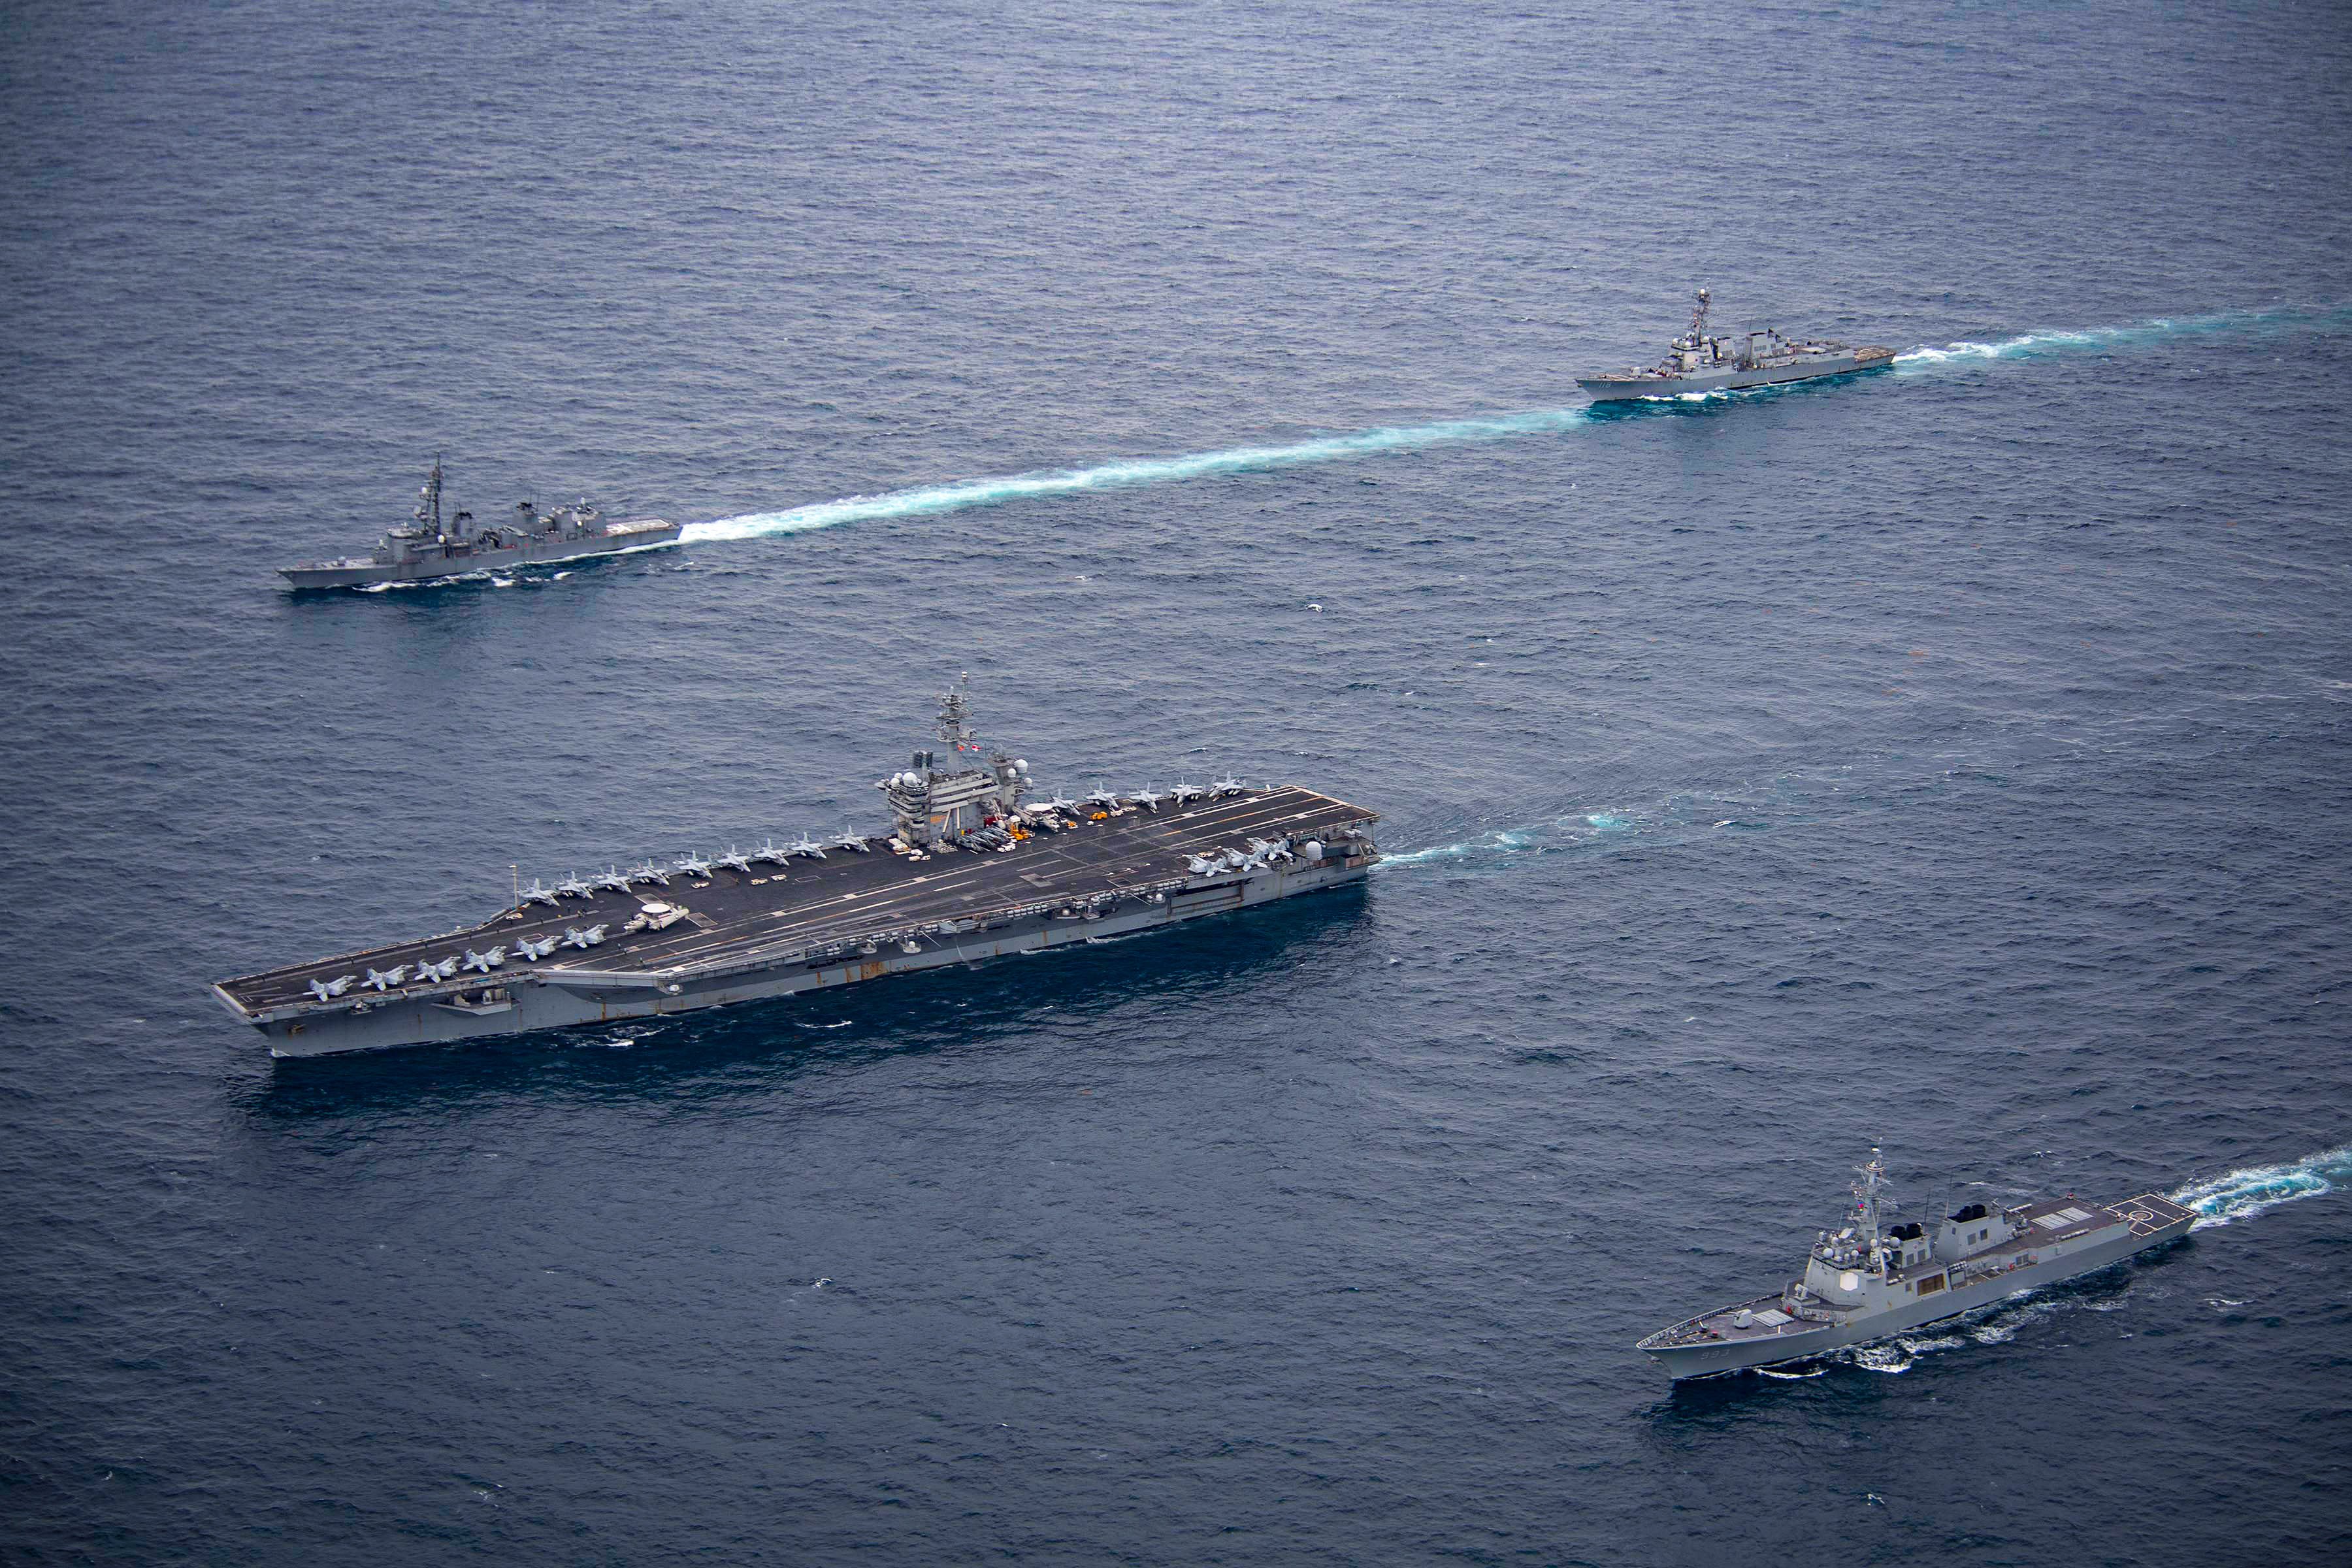 South Korea’s navy said last week it had conducted joint naval drills with the US and Japan in international waters south of Jeju Island to “improve joint operability against North Korea’s nuclear and missile threats”. Photo: US Navy